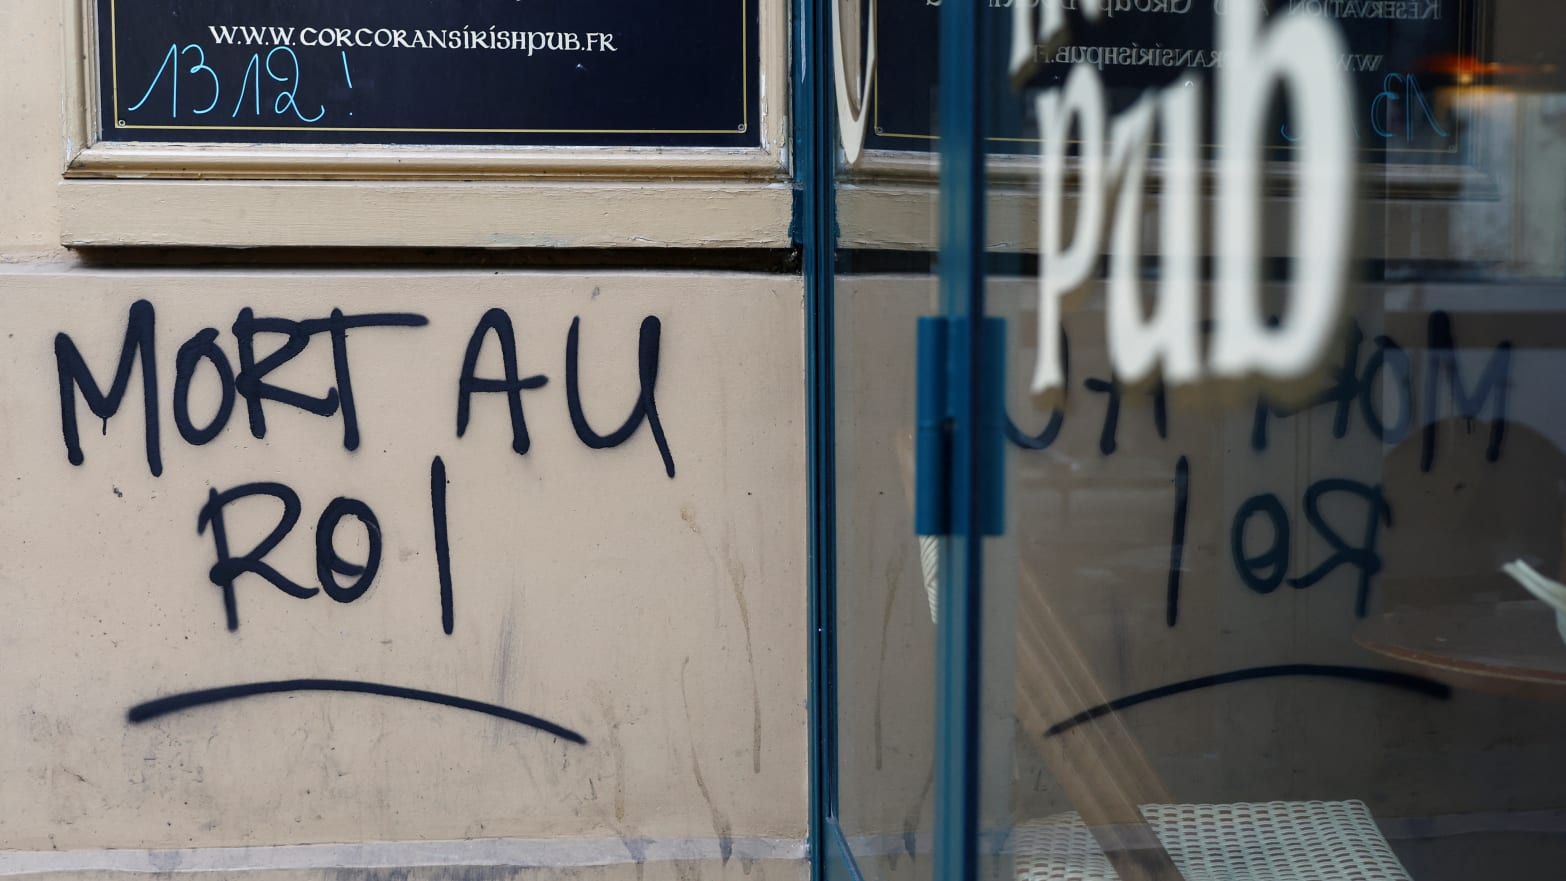 Graffiti reading “Death to the King” in Paris amid pension protests.